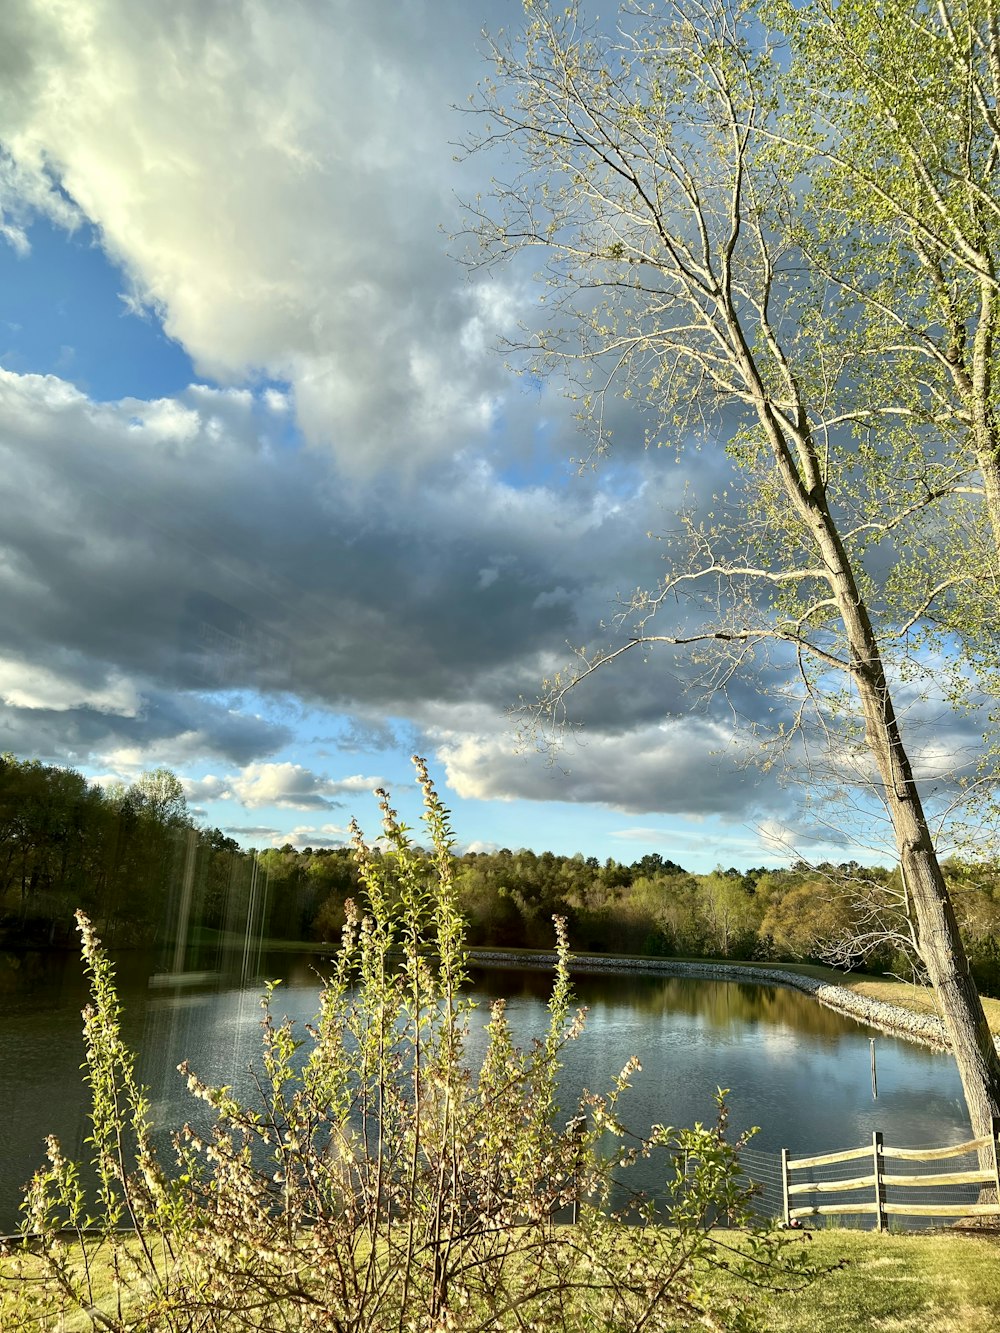 a lake surrounded by trees and grass under a cloudy sky